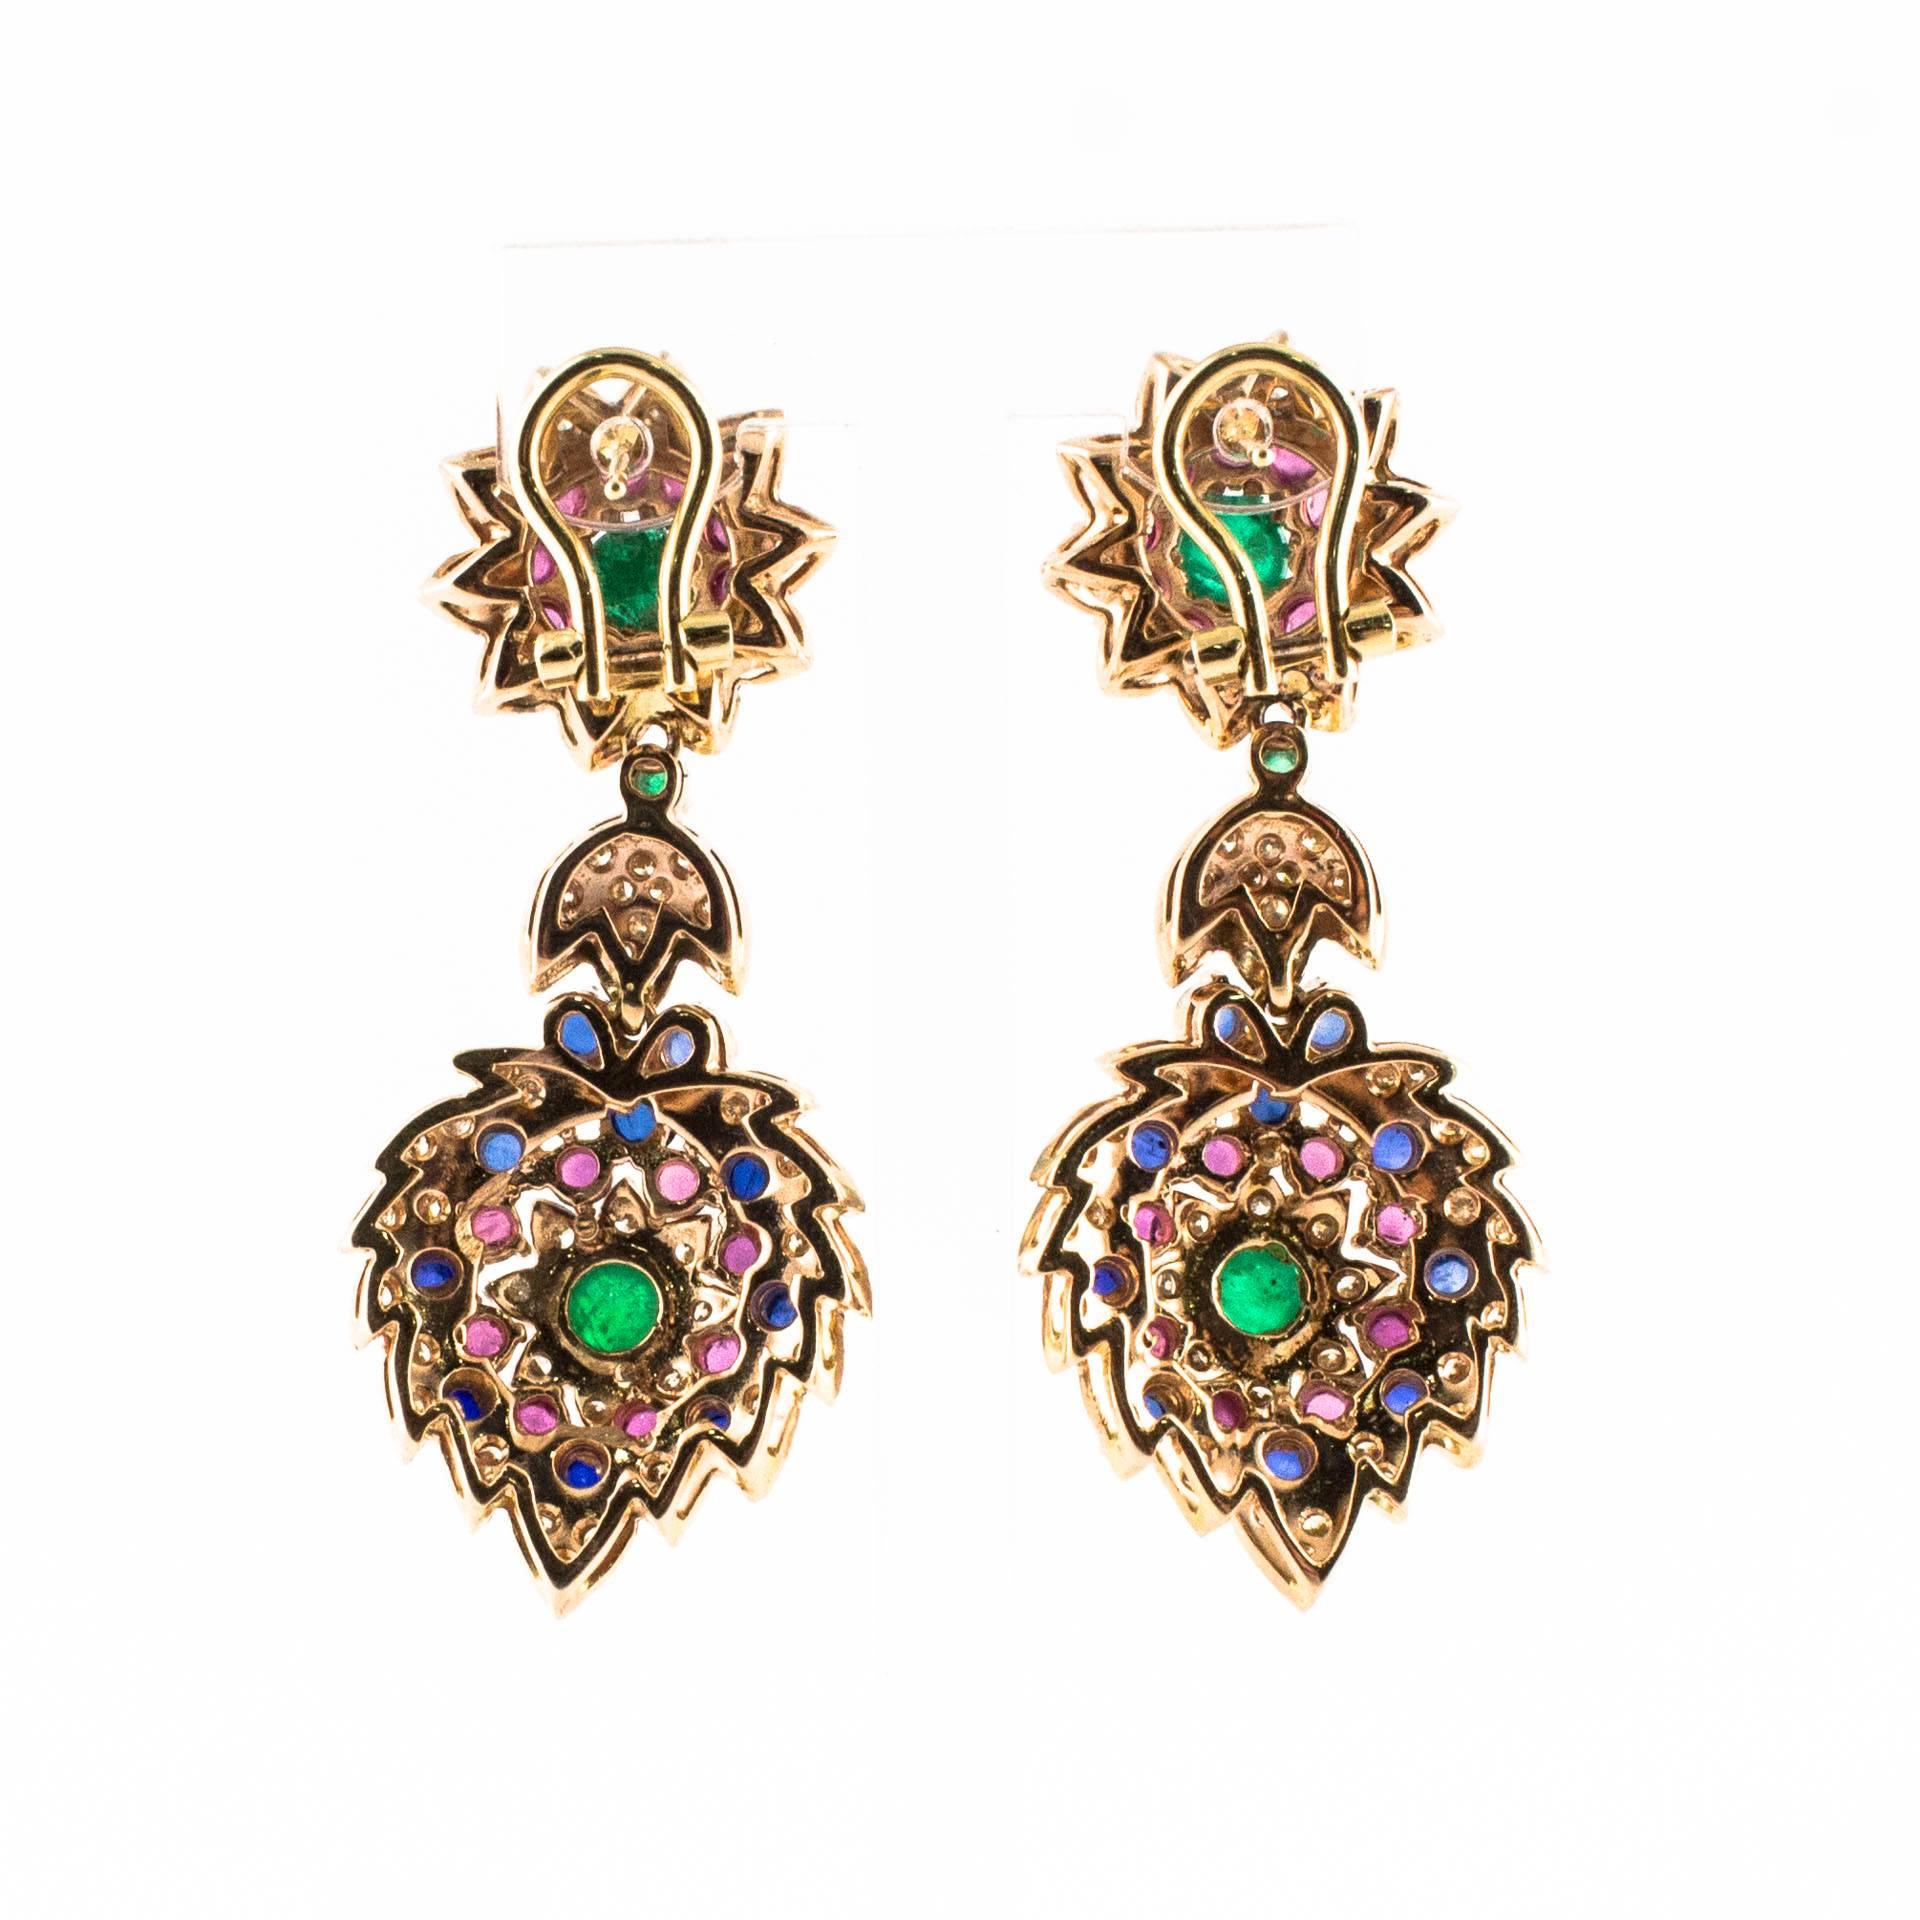 Very special earrings in Rose gold studded with ruby sapphires emeralds ct 3,62 and ct 2,18 diamonds that illuminate these fantastic earrings.
total weight :22,54
R.F ccuf

For any enquires, please contact the seller through the message center.